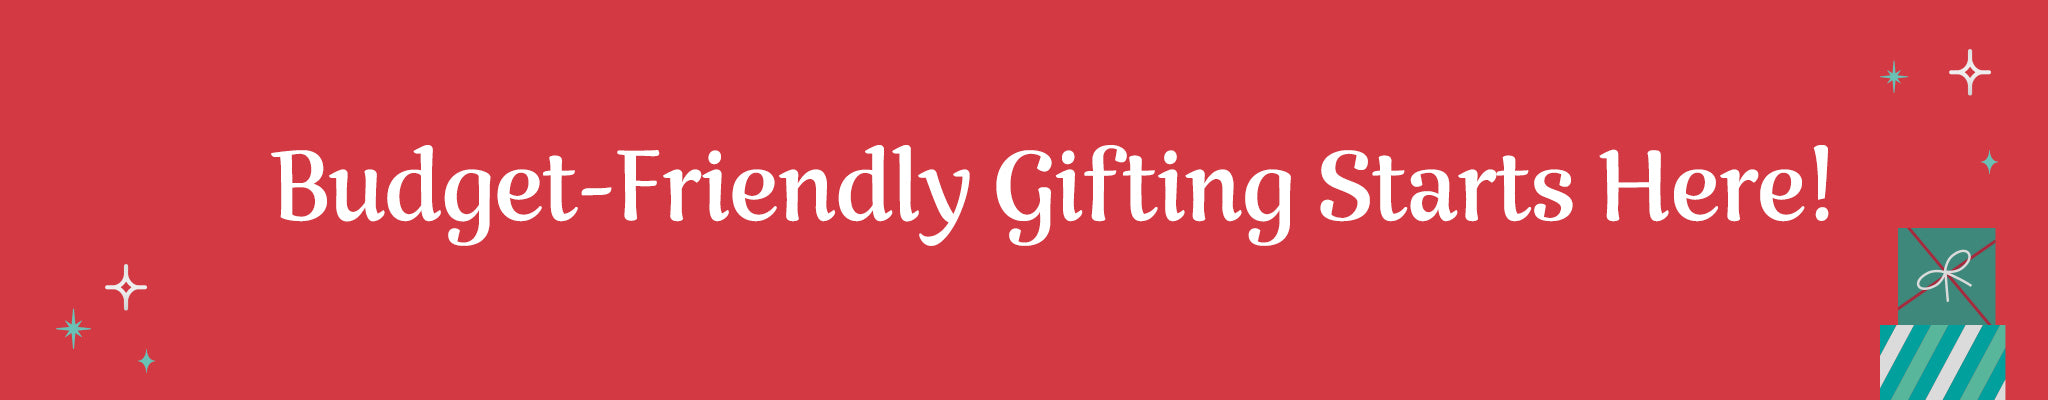 Great gifts on a budget